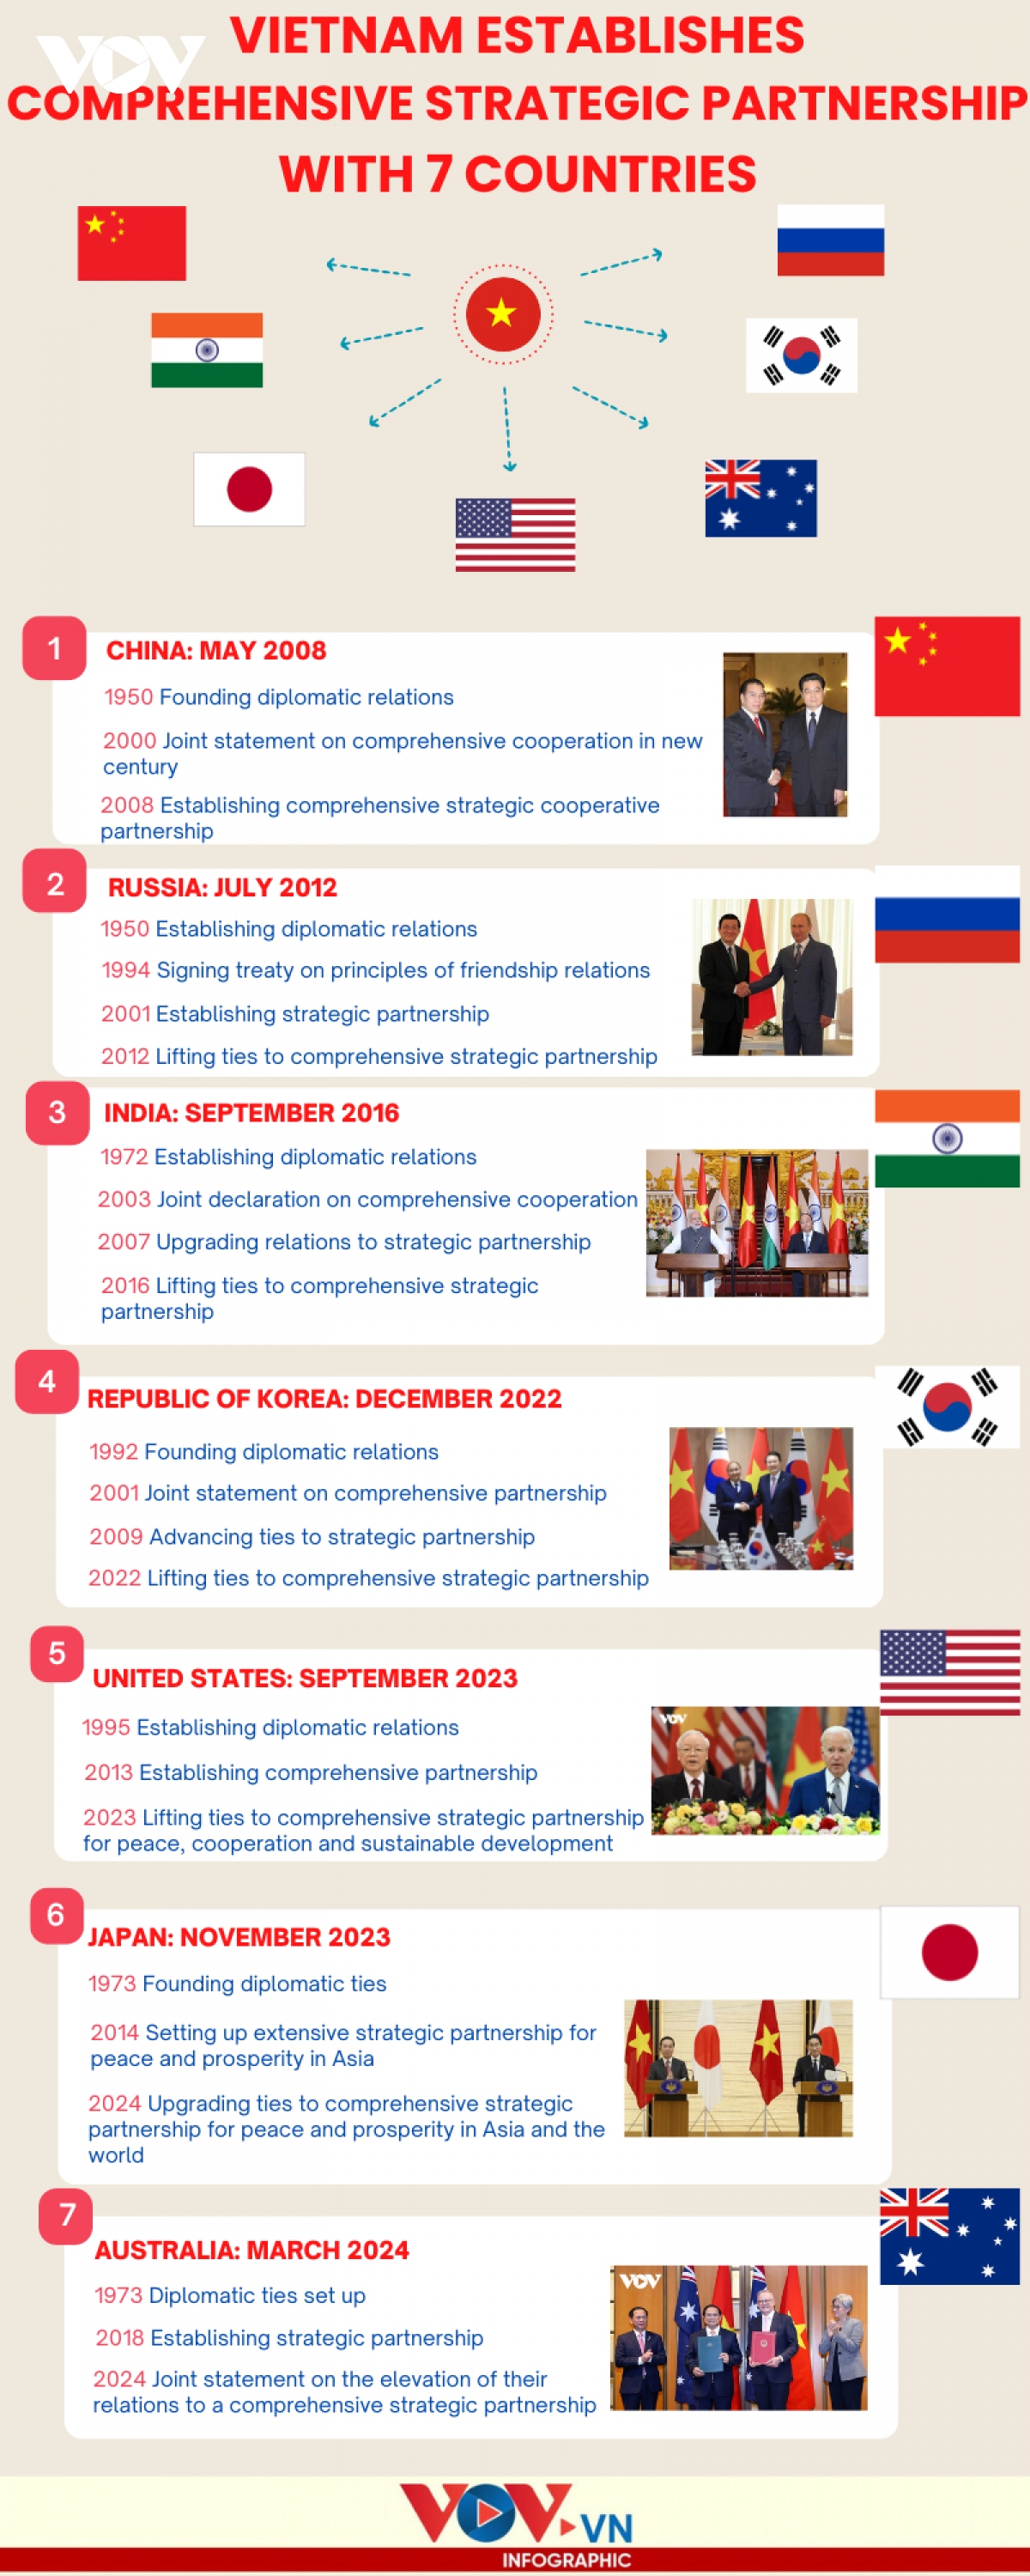 Which countries have set up comprehensive strategic partnership with Vietnam?